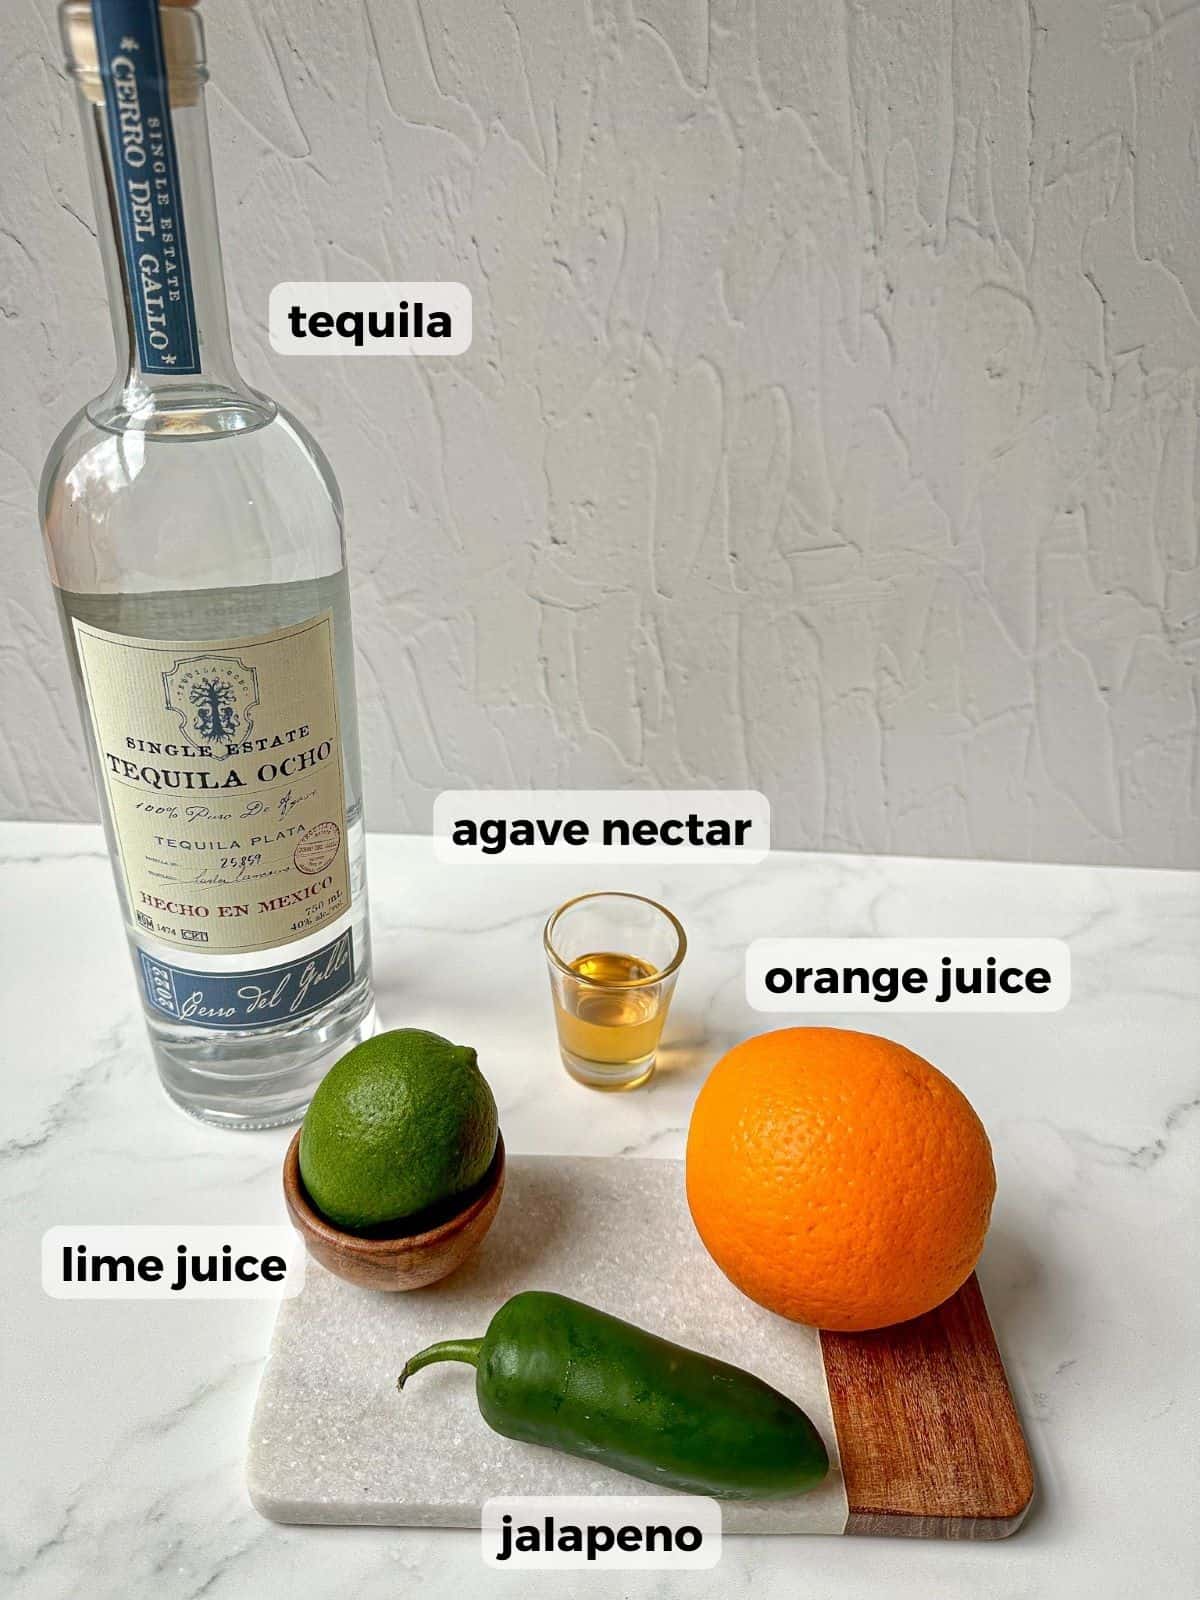 Ingredients needed to make this margarita include: a bottle of tequila, fresh lime juice, fresh orange juice, jalapeno slices, and agave nectar.